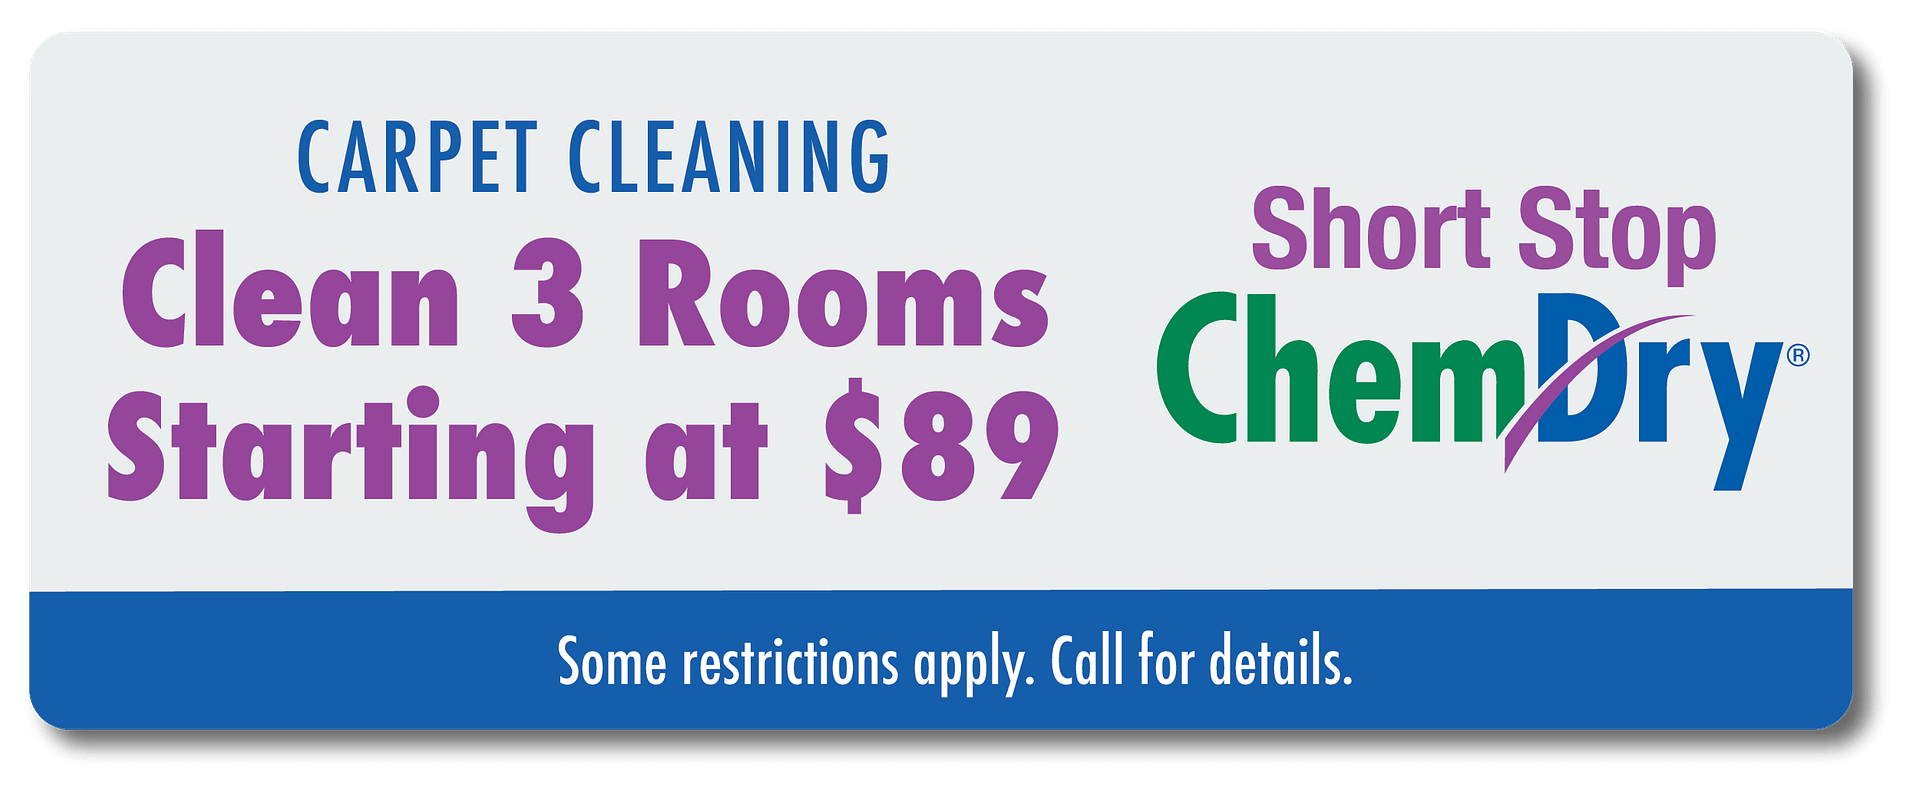 clean 3 rooms starting at $89 coupon